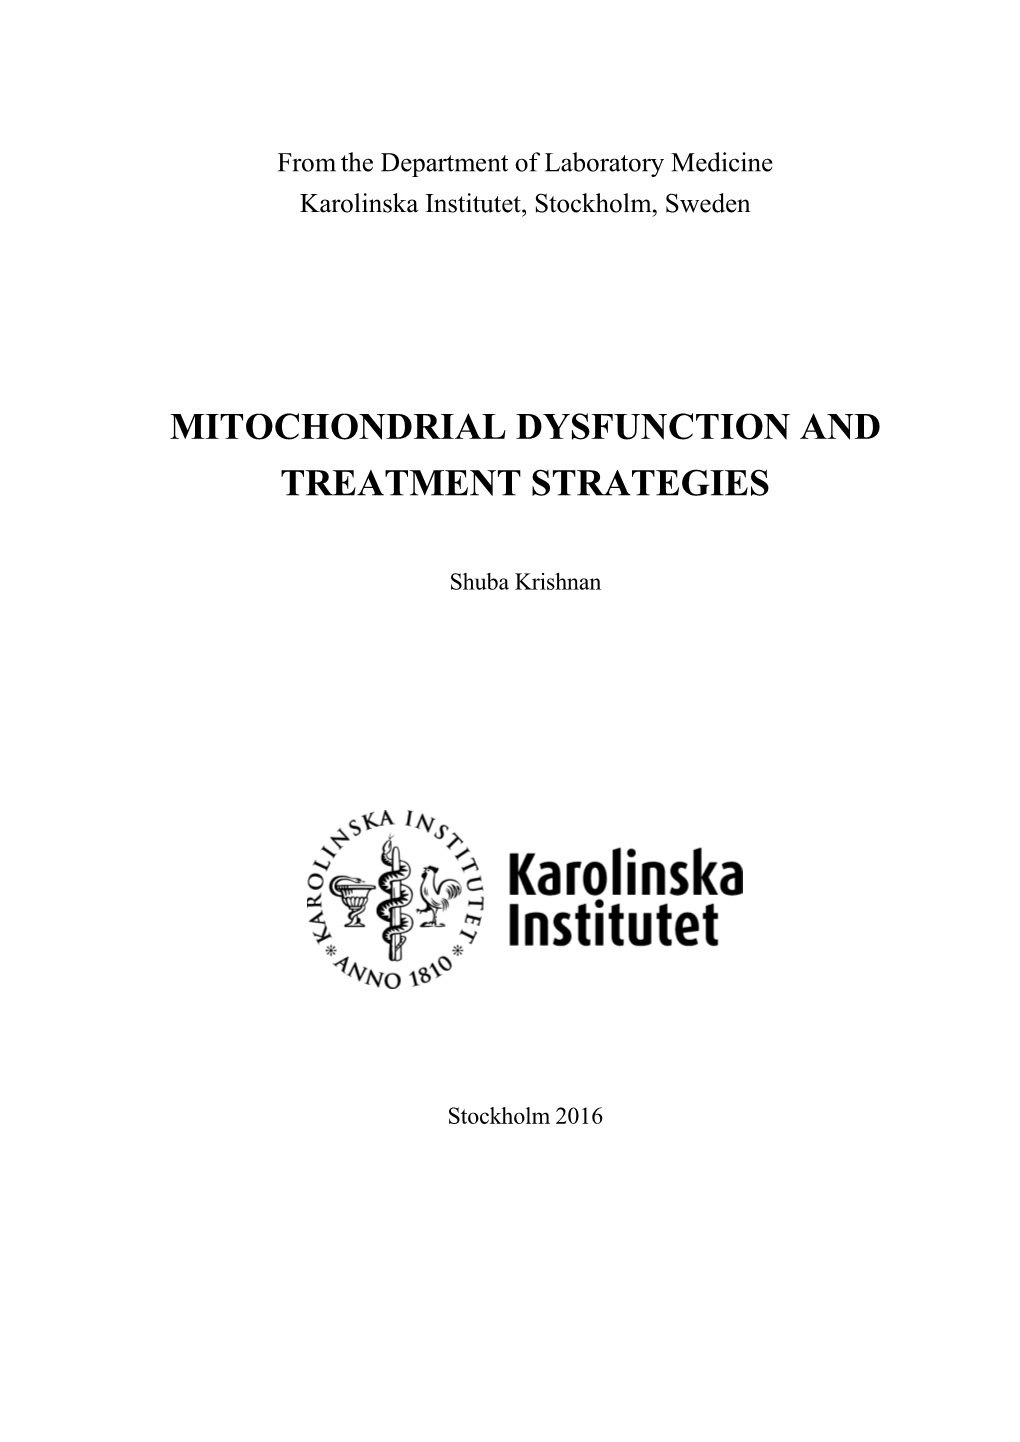 Mitochondrial Dysfunction and Treatment Strategies